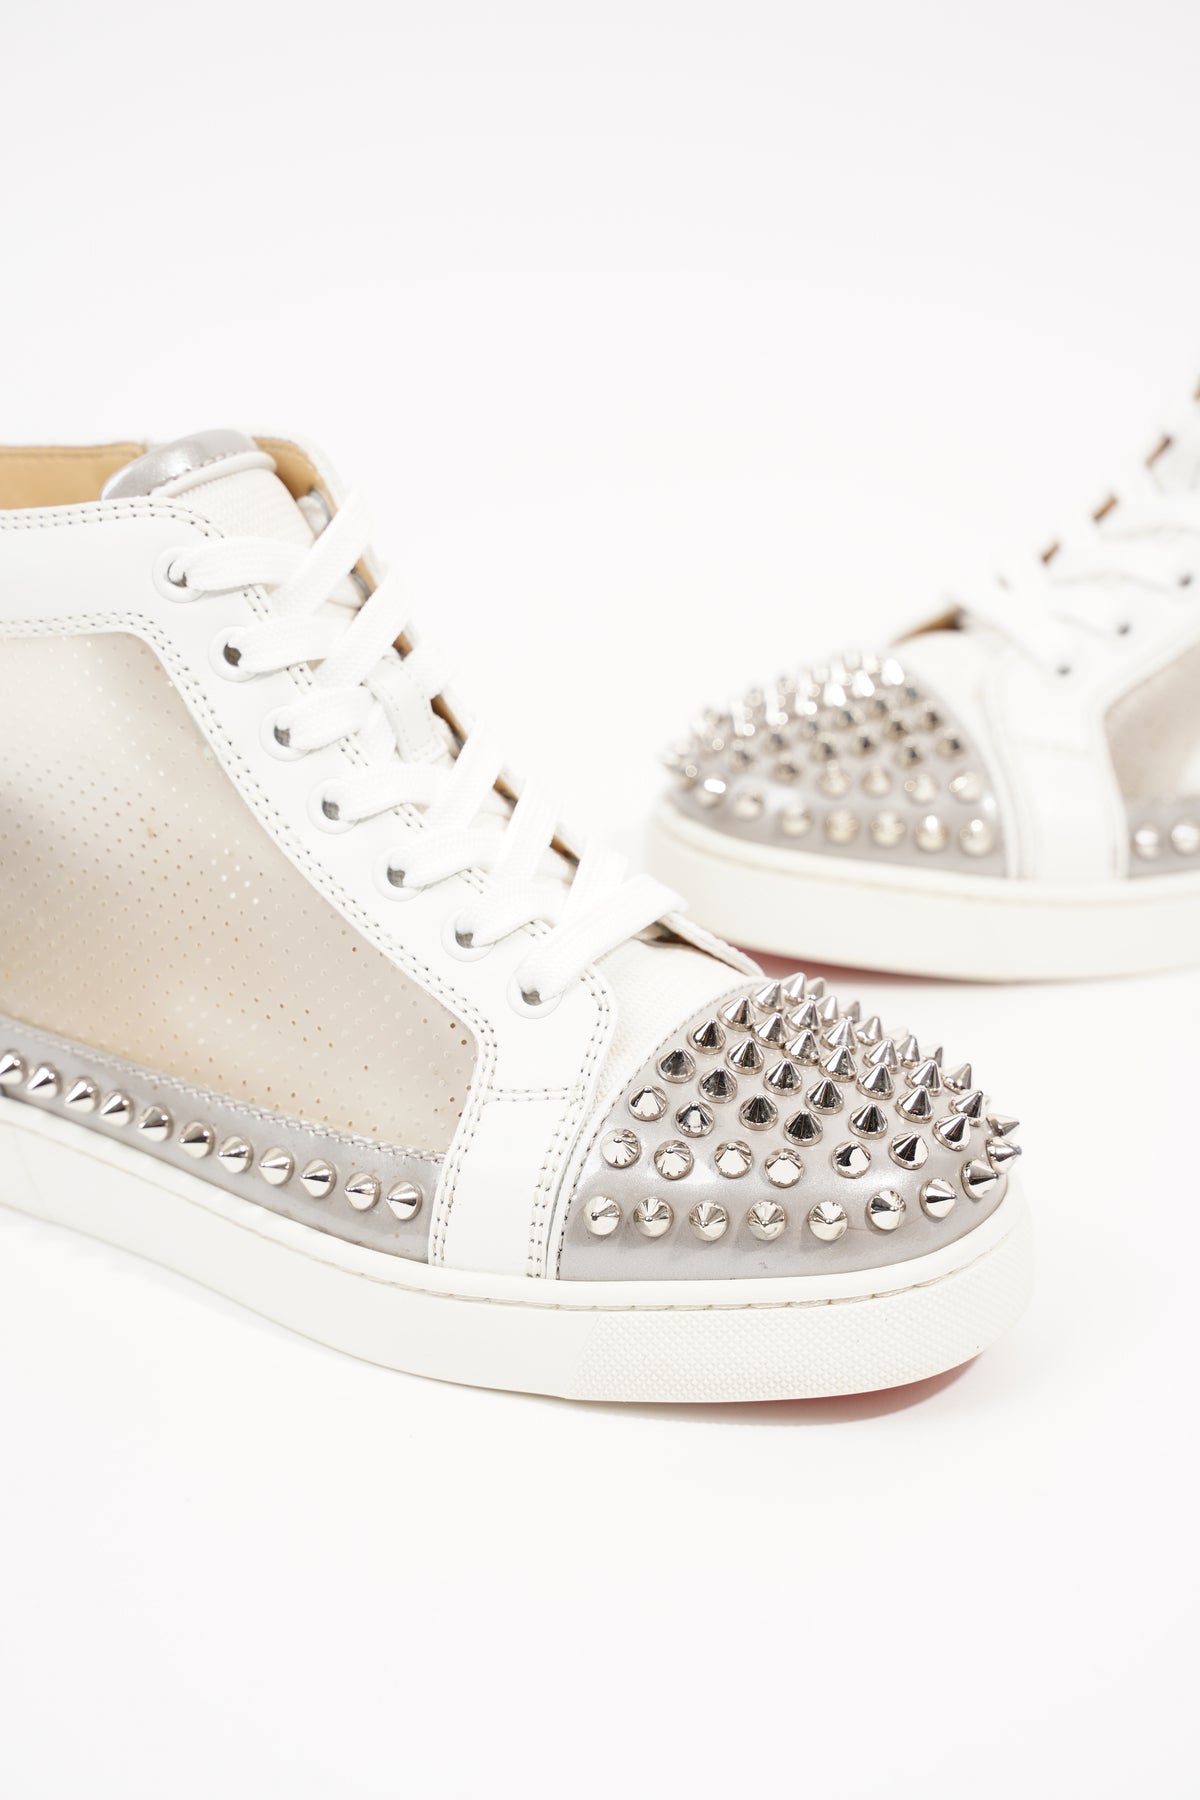 Christian Louboutin Sosoxy Spikes High-Top Sneakers in White